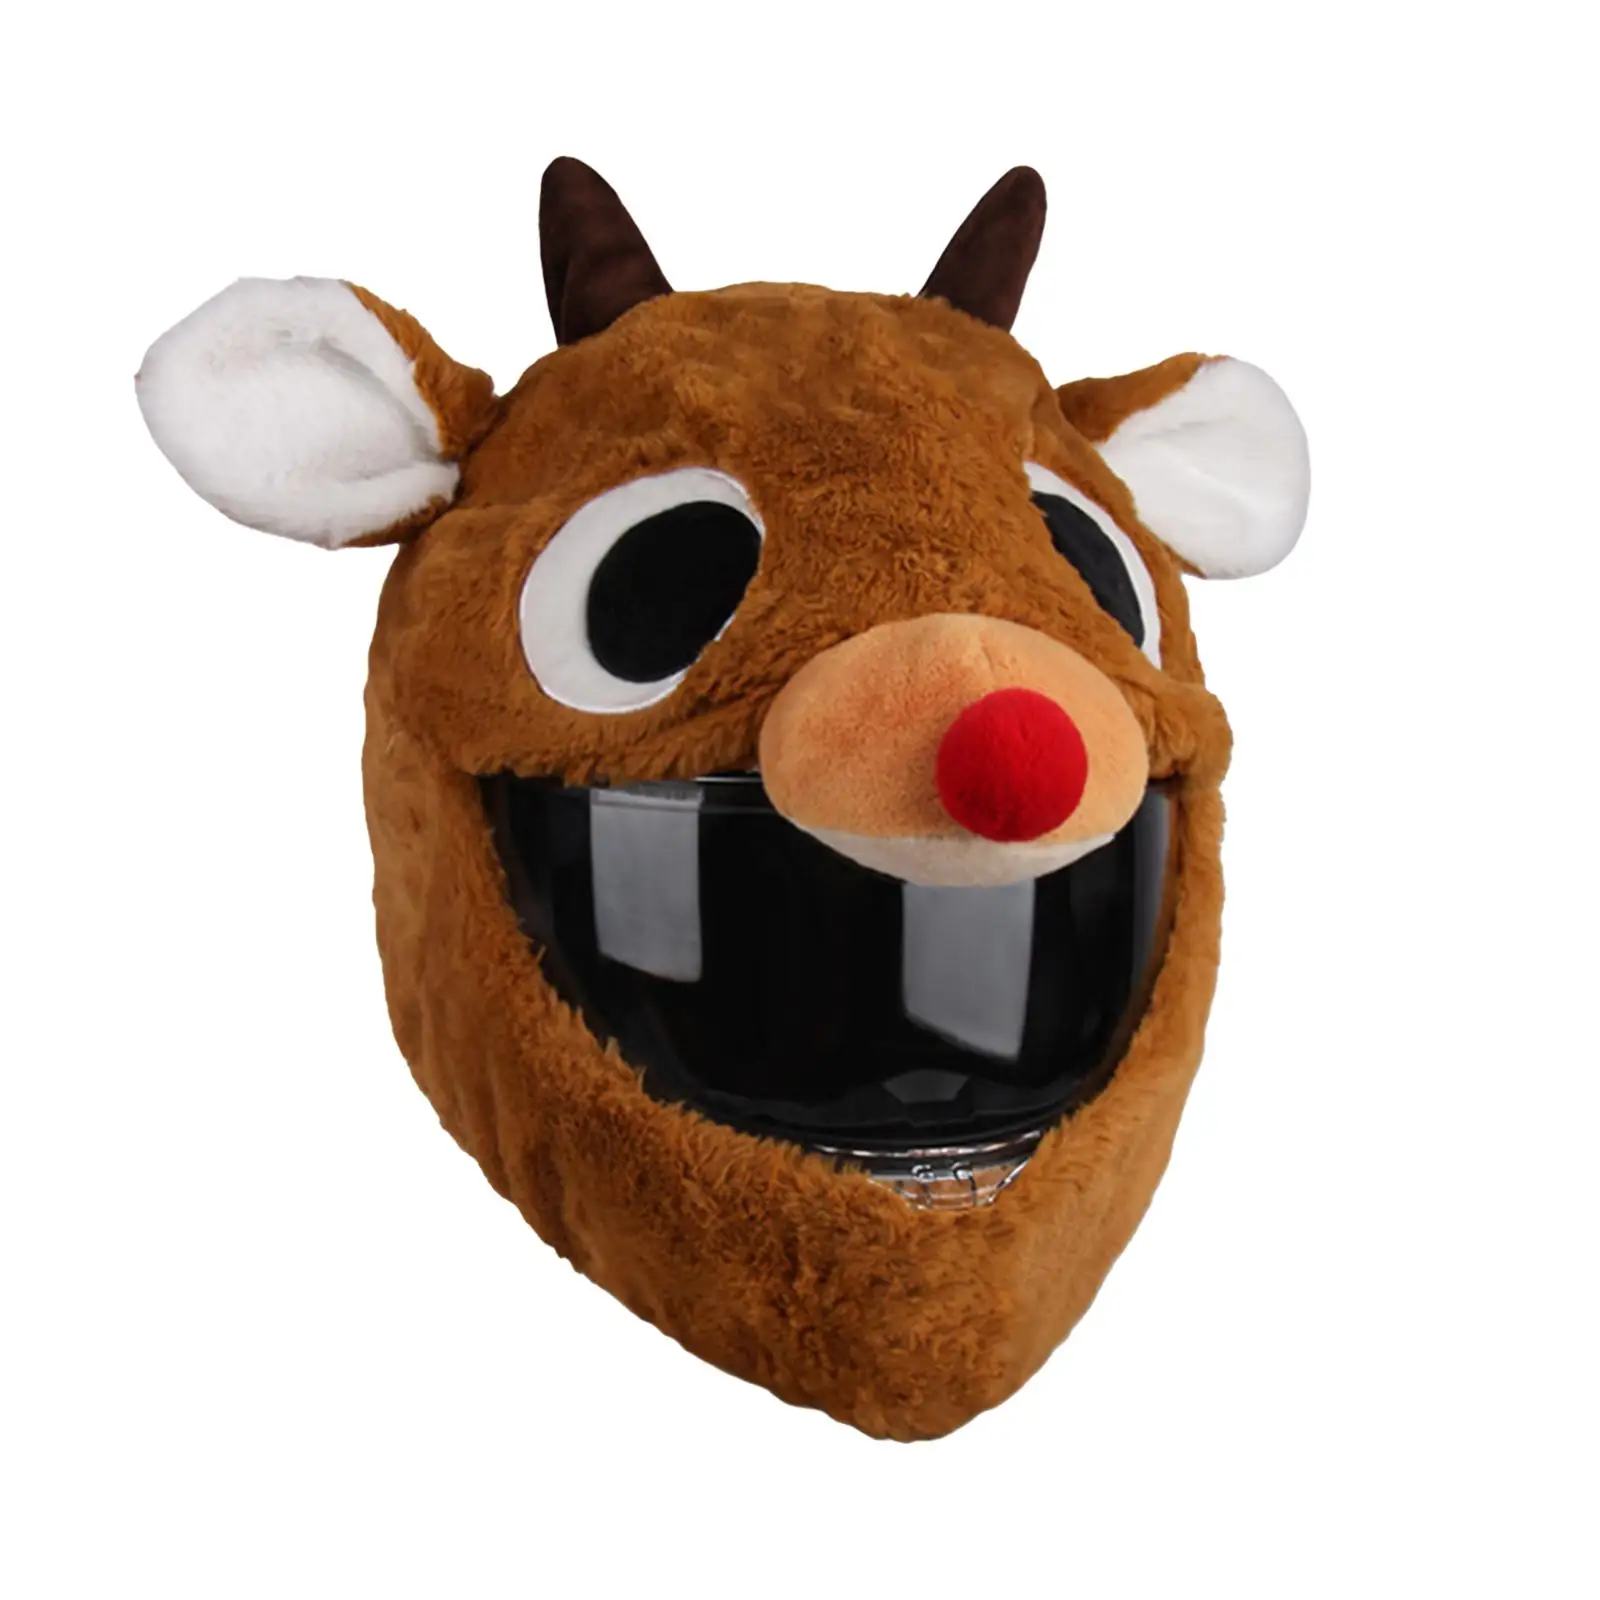 Helmet Cover Reindeer Shaped Increase Riding Fun Protective Plush Soft Motorbike for Full Face Helmets Helmet Protective Cover